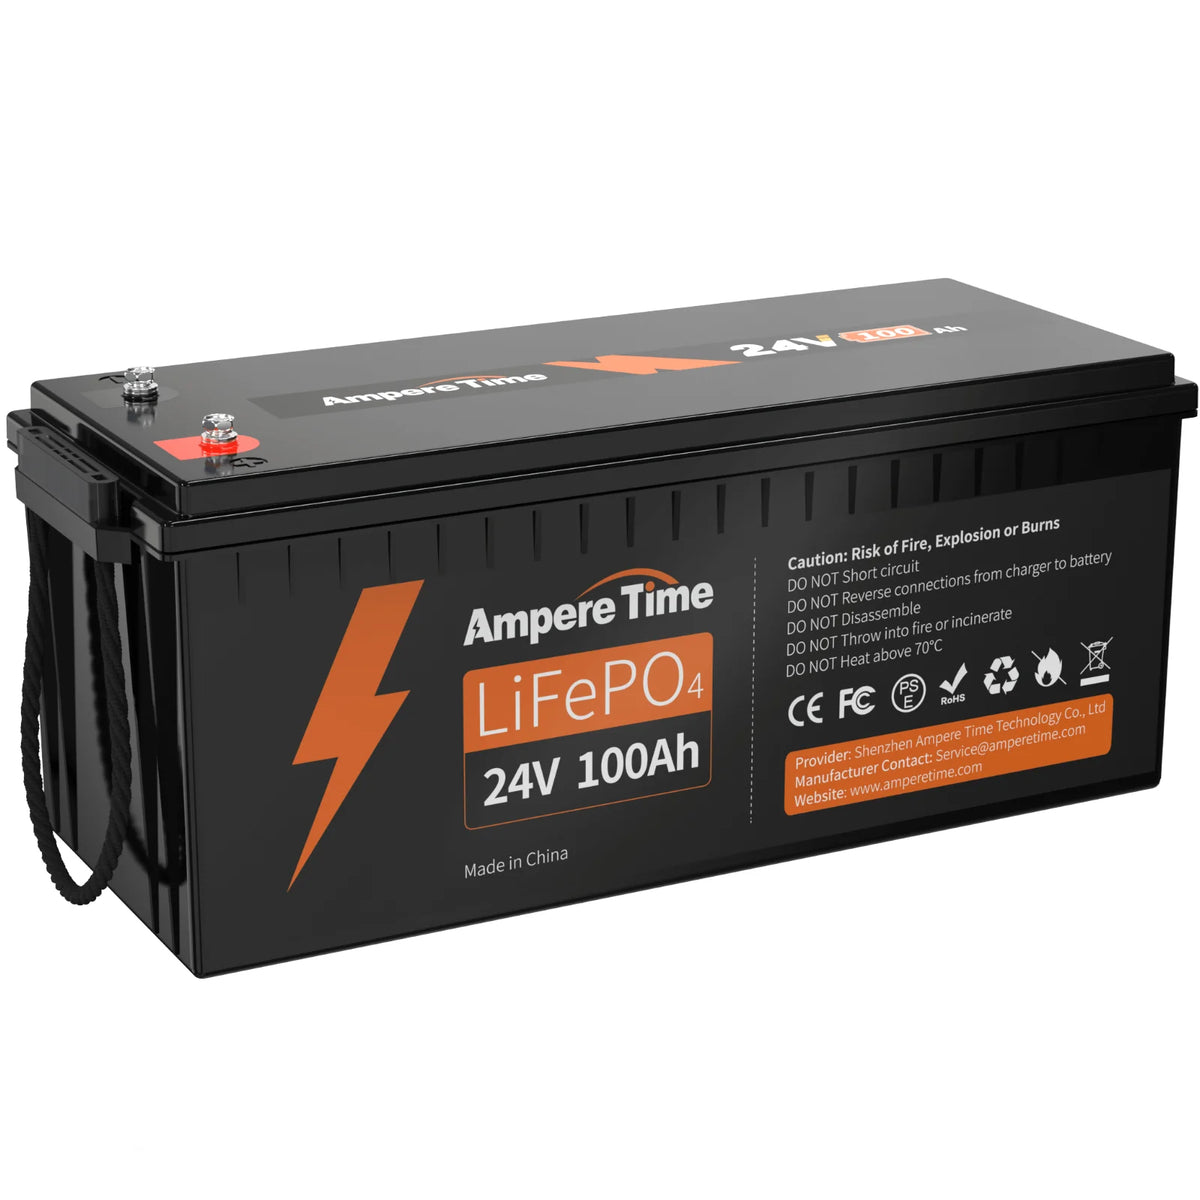 Ampere Time 24V 100Ah LiFePO4 battery with 100A BMS, Max. 2560Wh energy